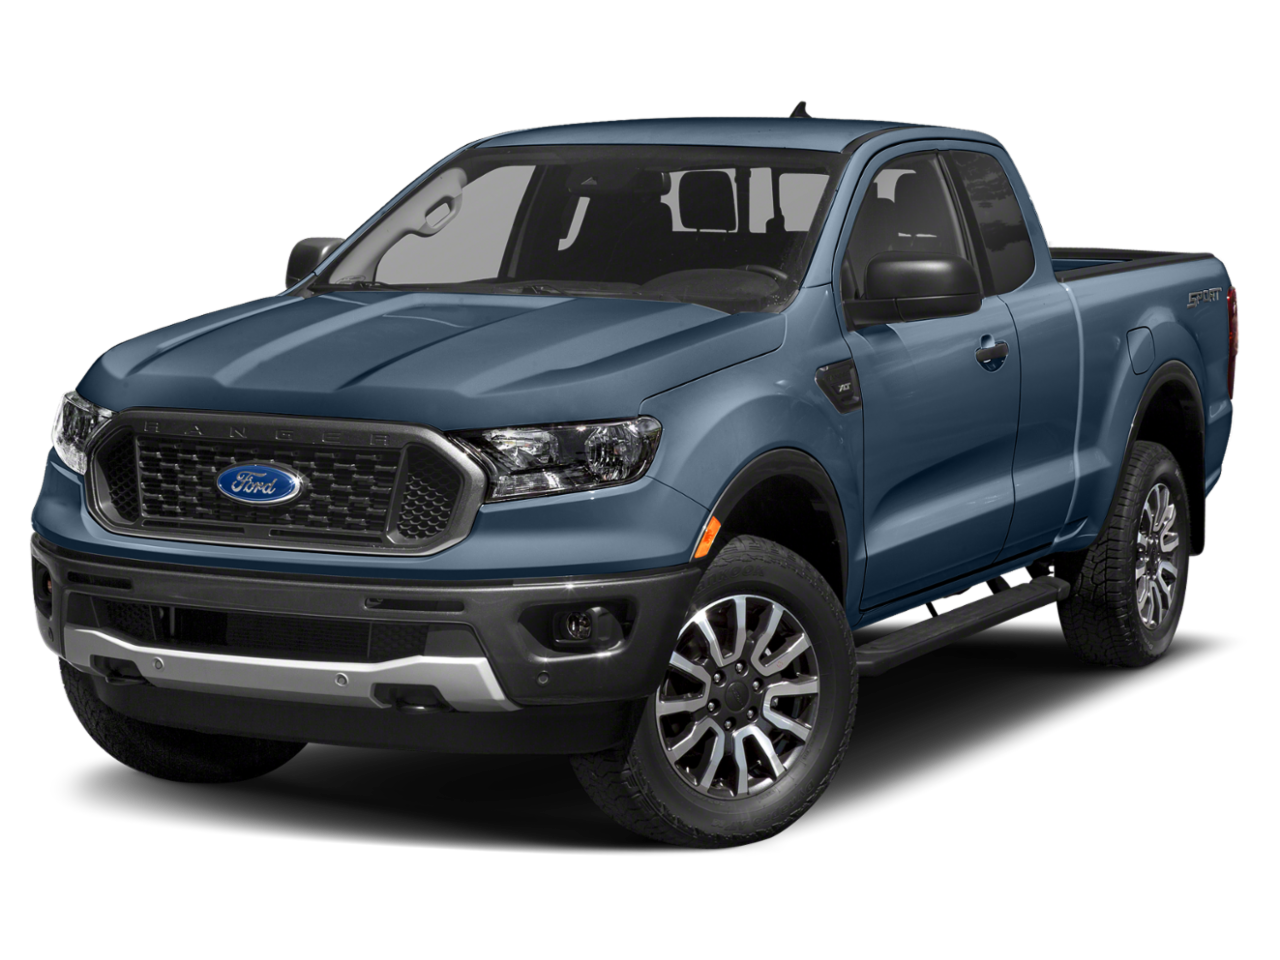 In search of a new Ford Ranger? Tom Boland Ford, Inc. has new Ford